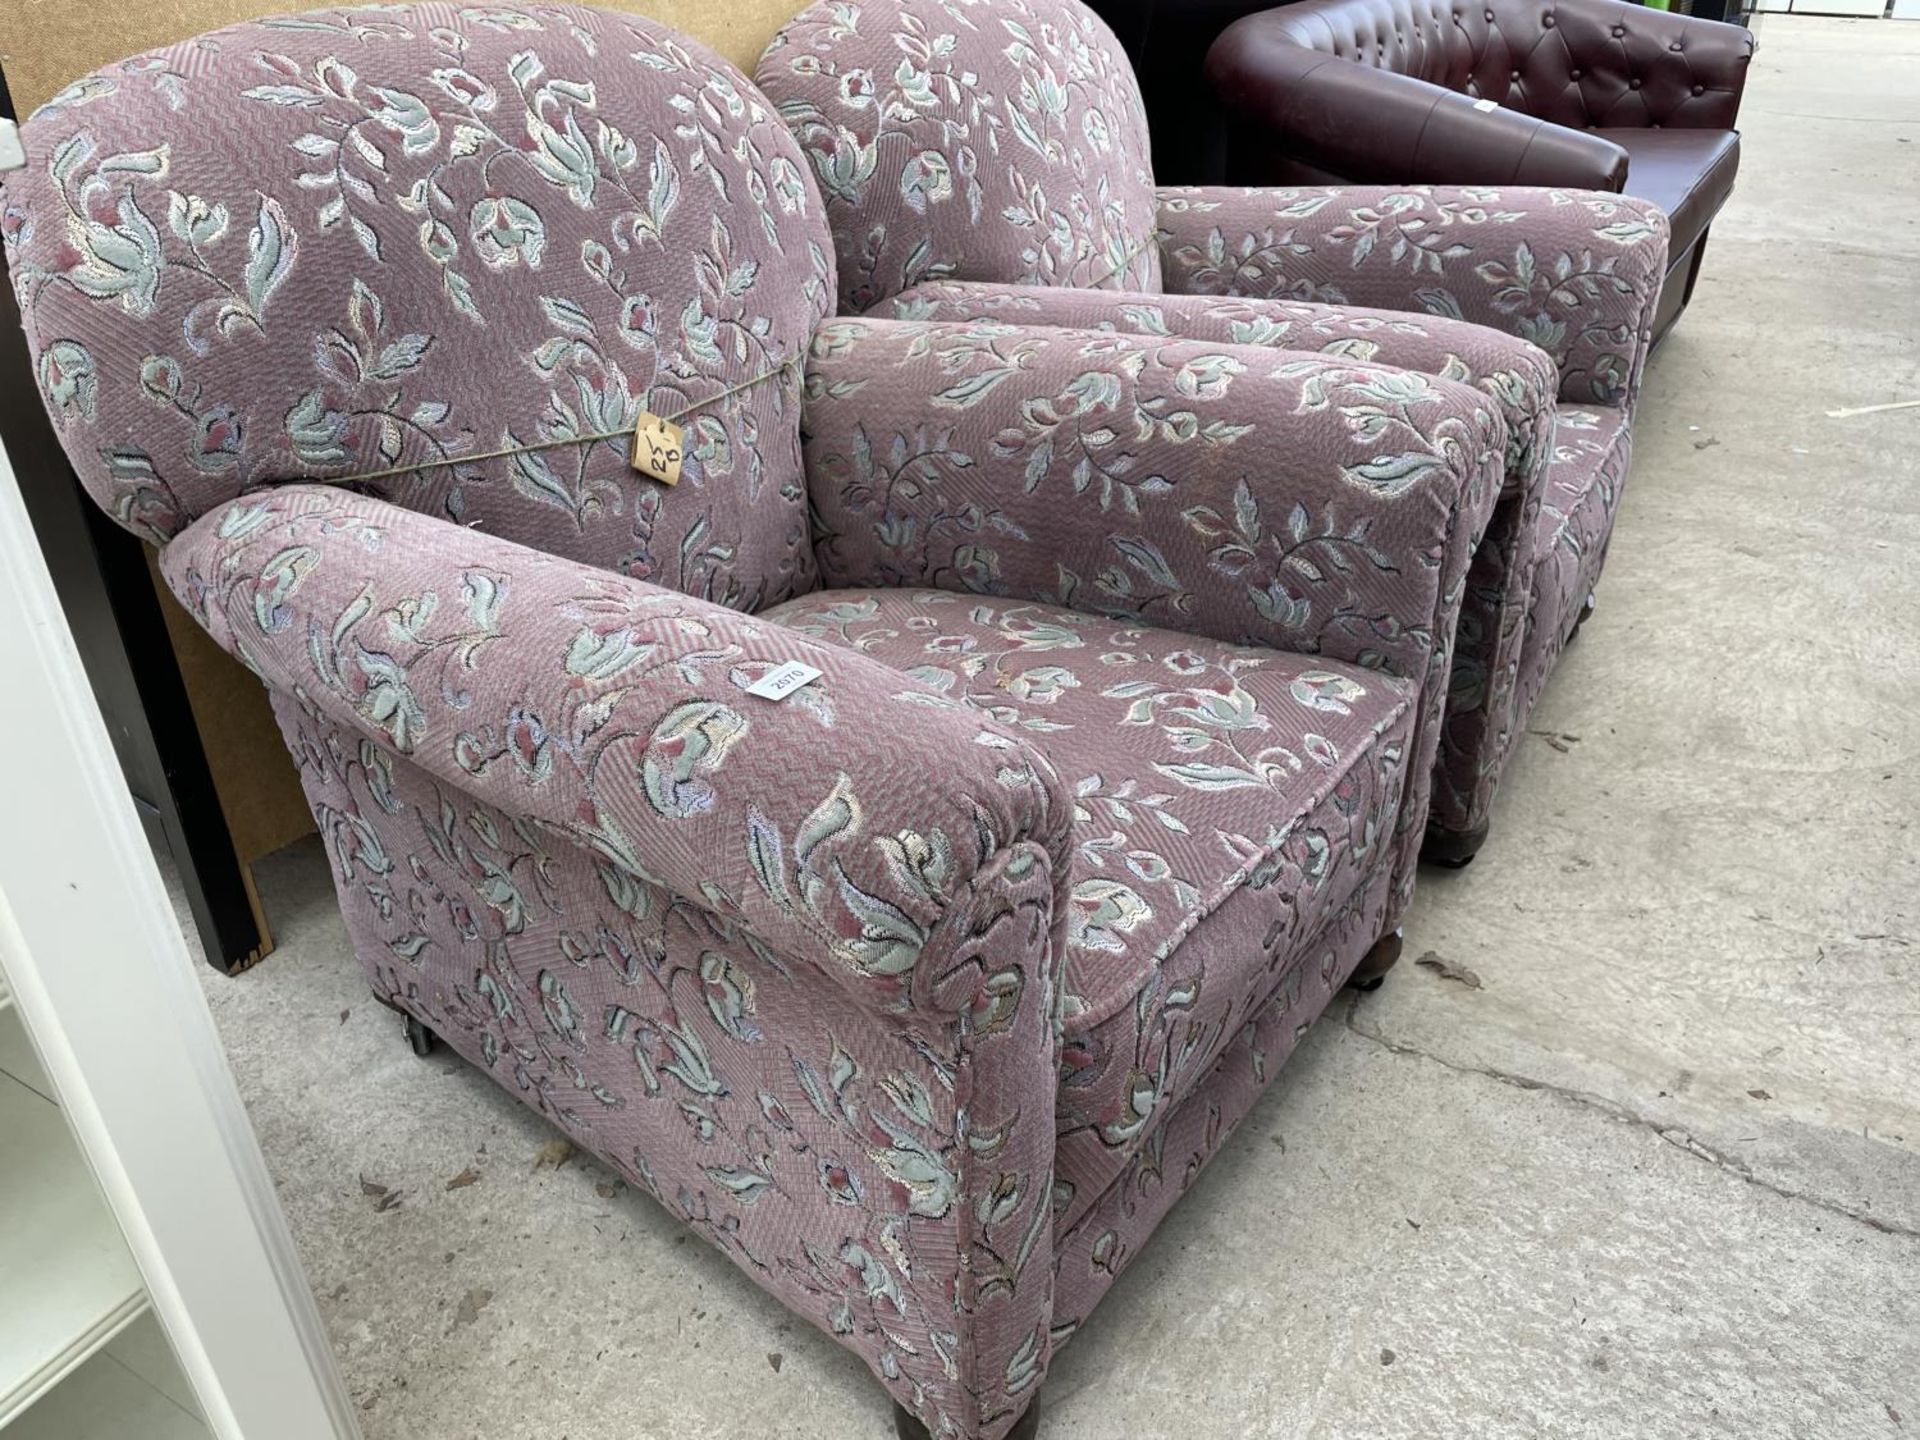 A PAIR OF EDARDIAN SPRUNG AND UPHOLSTERED EASY CHAIRS ON FRONT BUN FEET - Image 4 of 4